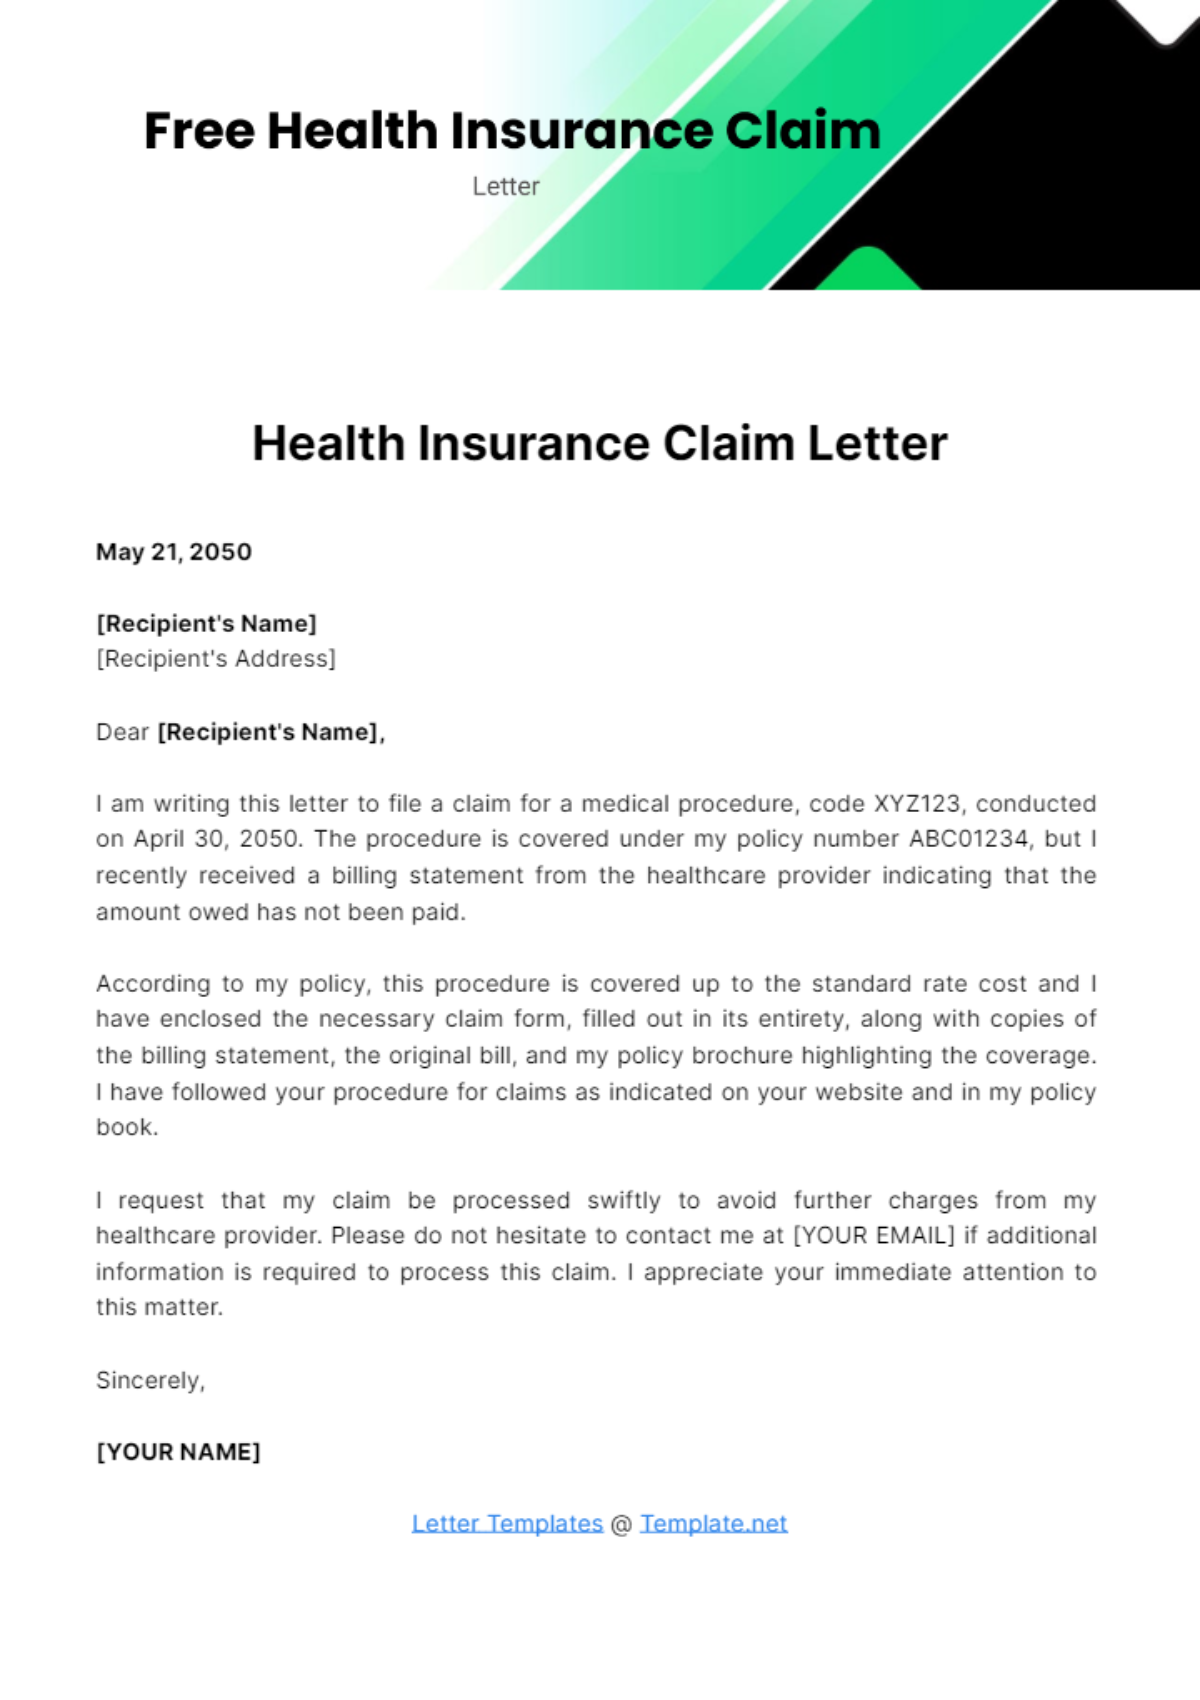 Free Health Insurance Claim Letter Template